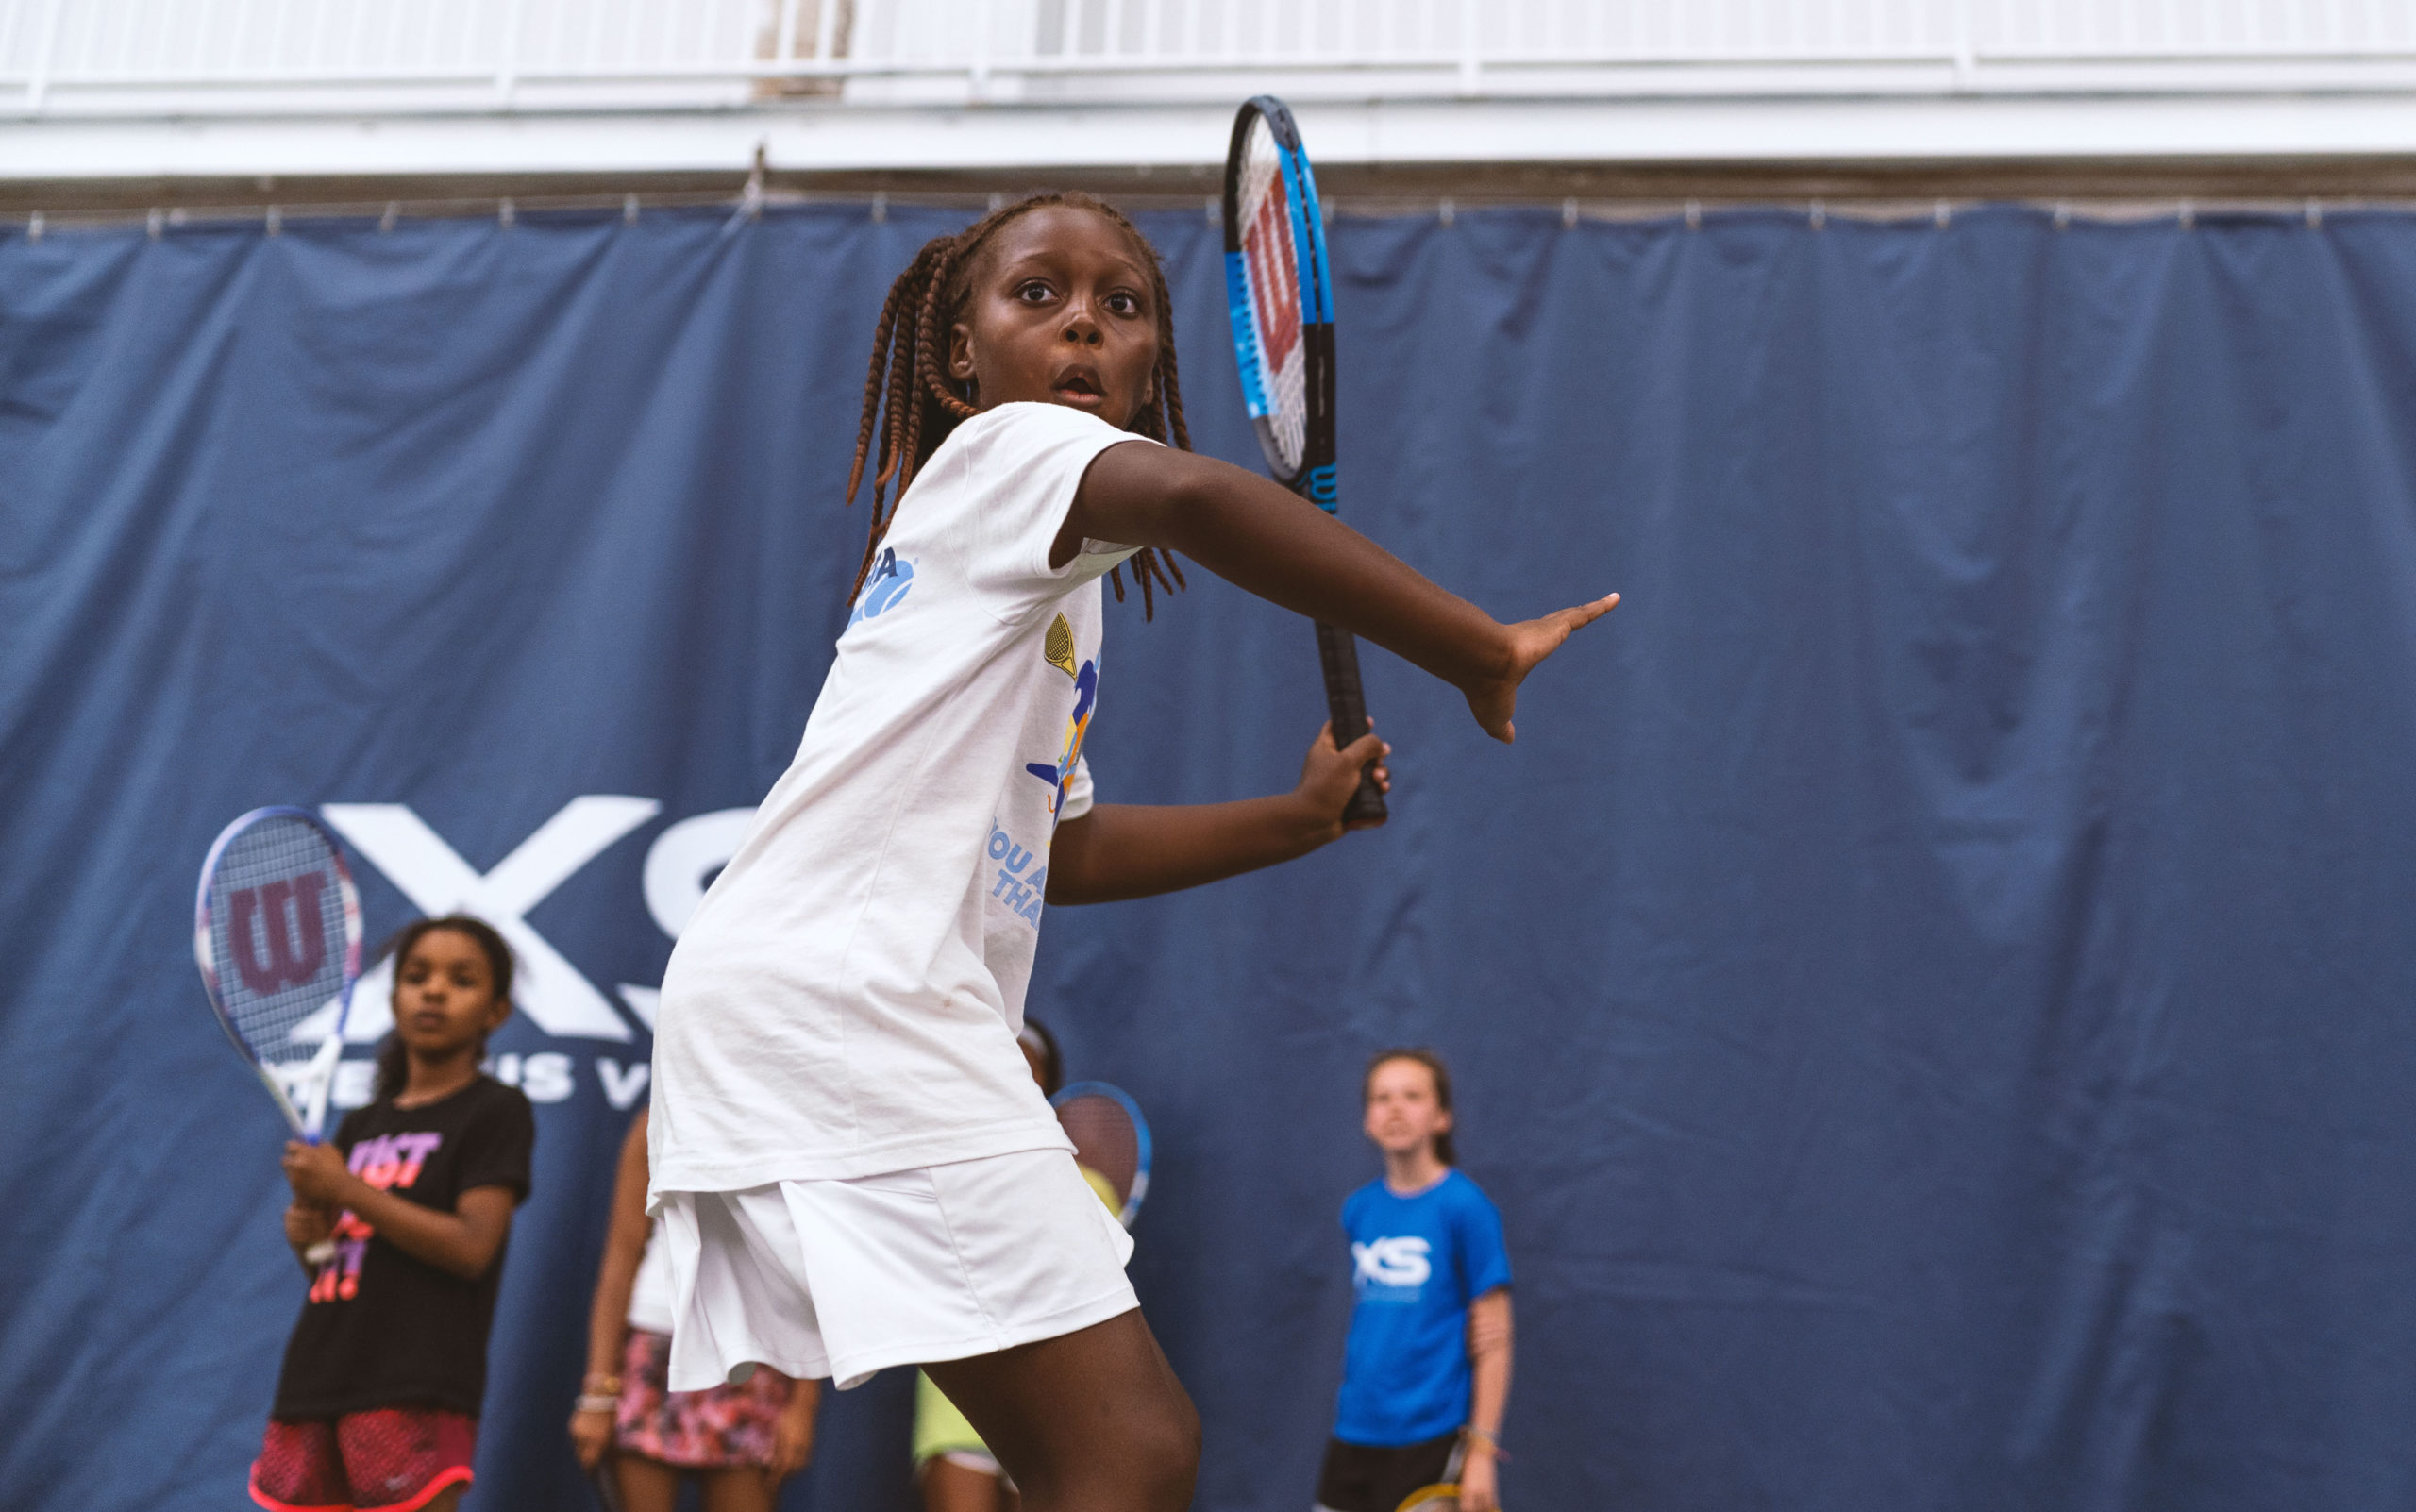 Benefits - Why Sports Participation for Girls and Women - Women's